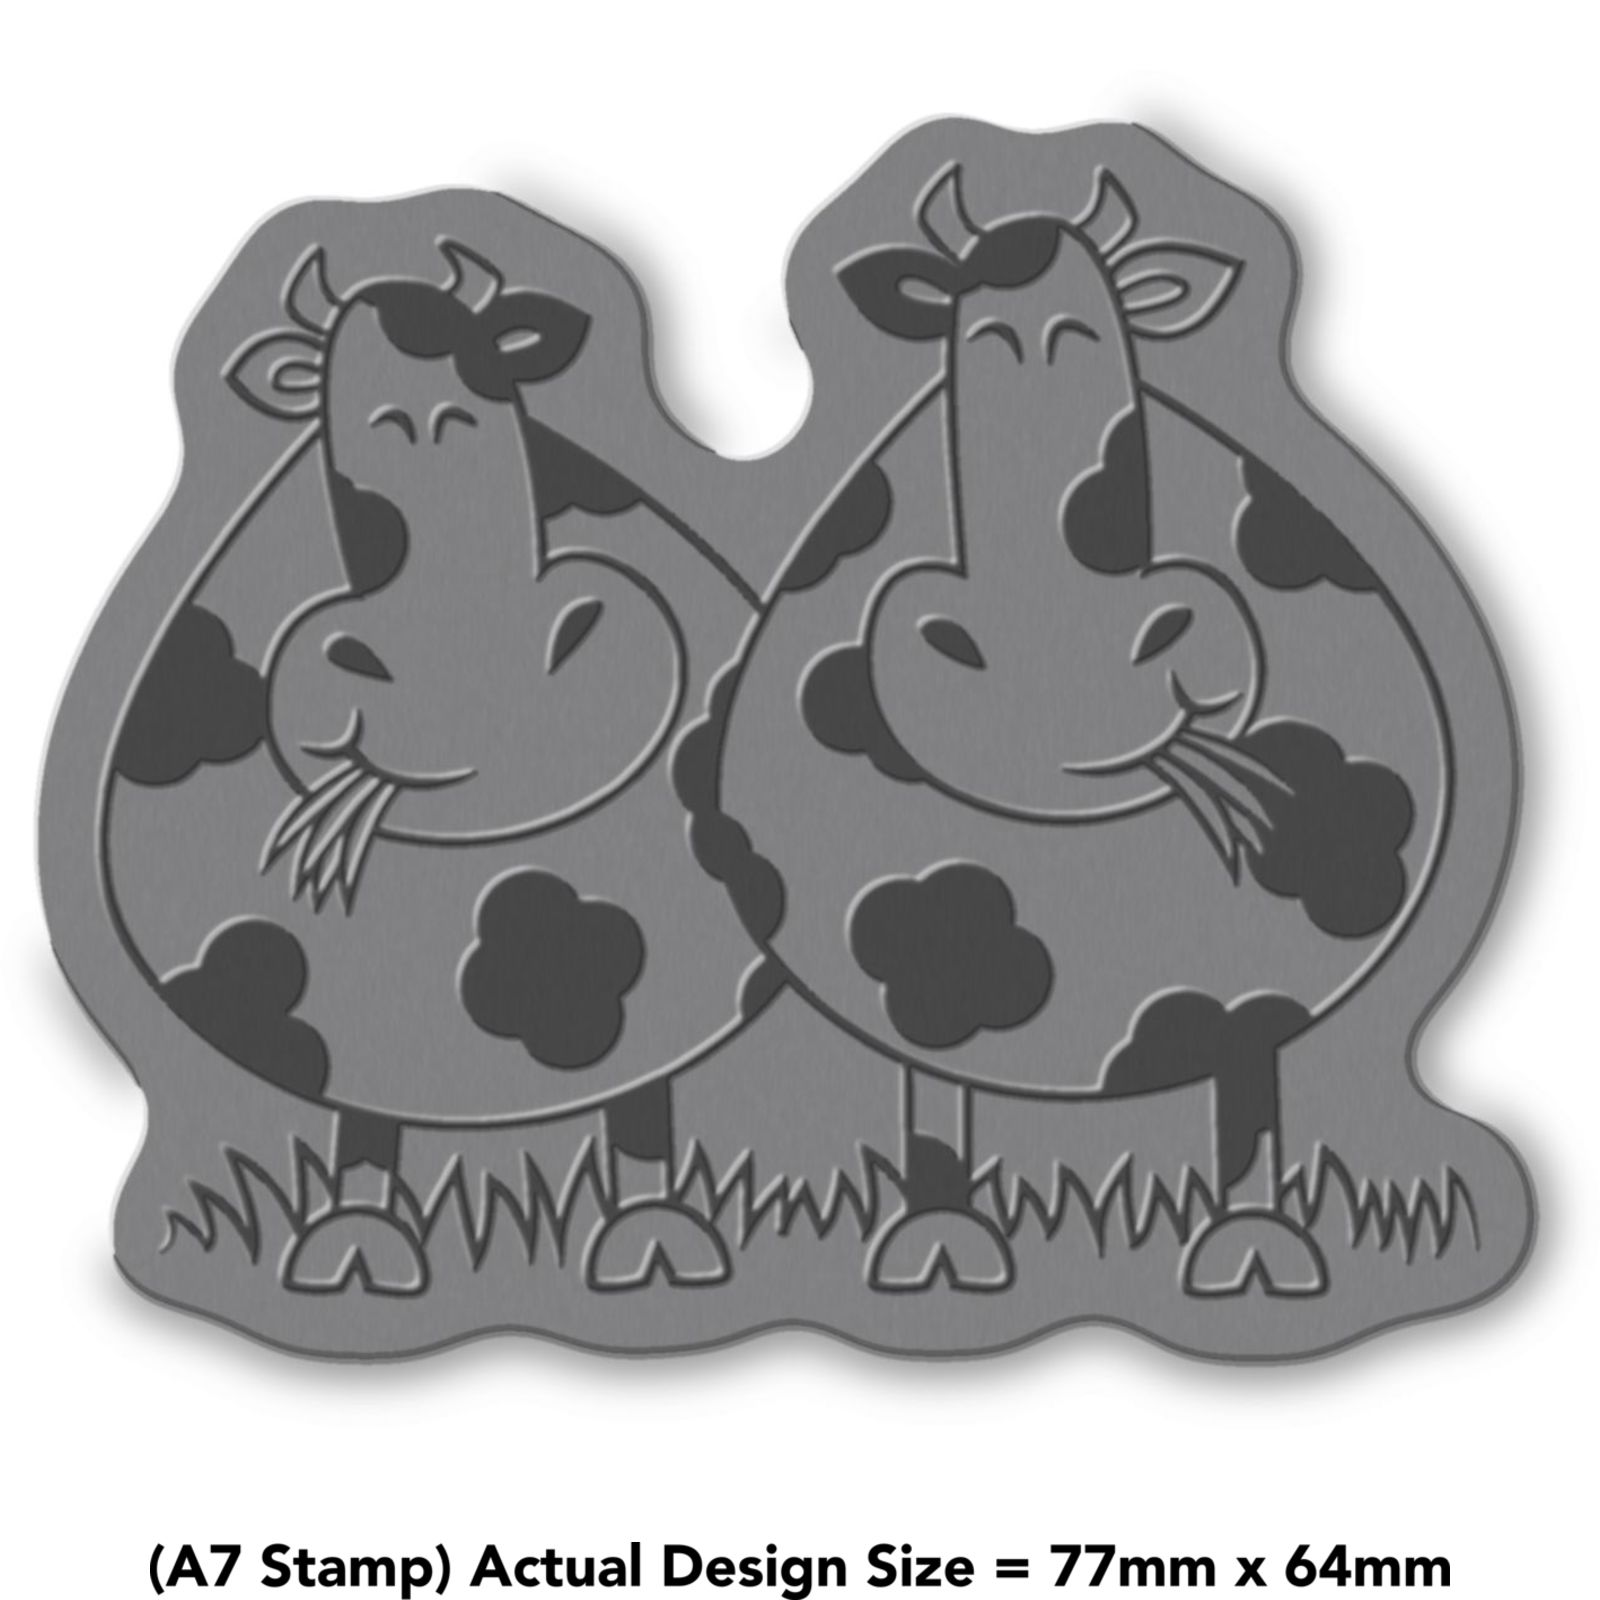 RS00003660 A7 Cows Eating Grass Unmounted Rubber Stamp 